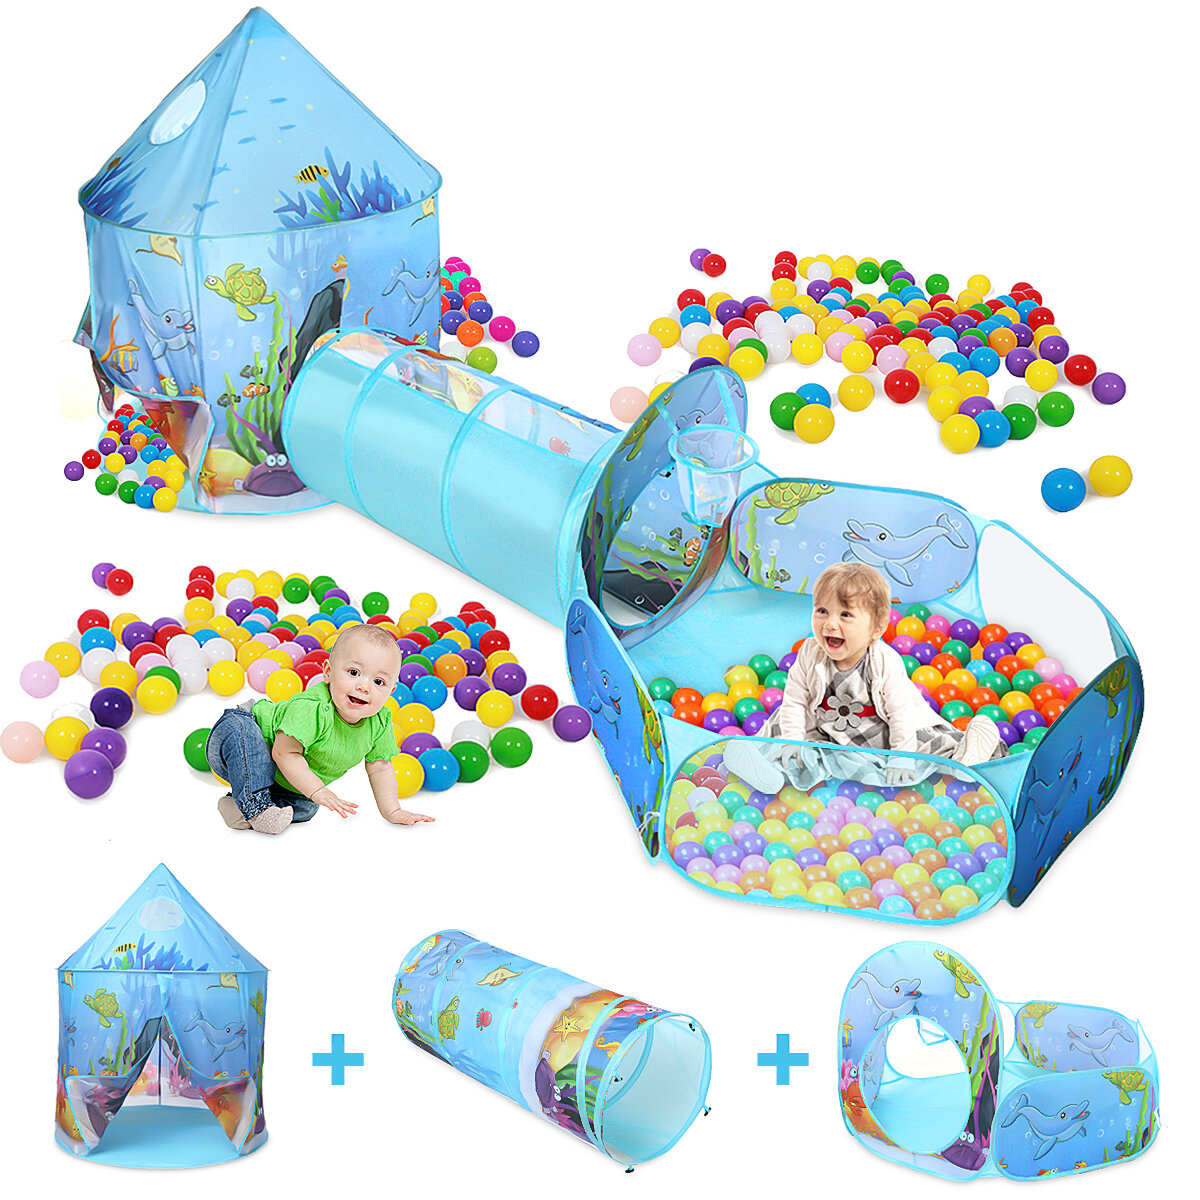 Image of 3-in-1 Kids Play Tent Portable Castle Playhouse Play Tunnels Ball Pit Children Game House Gift